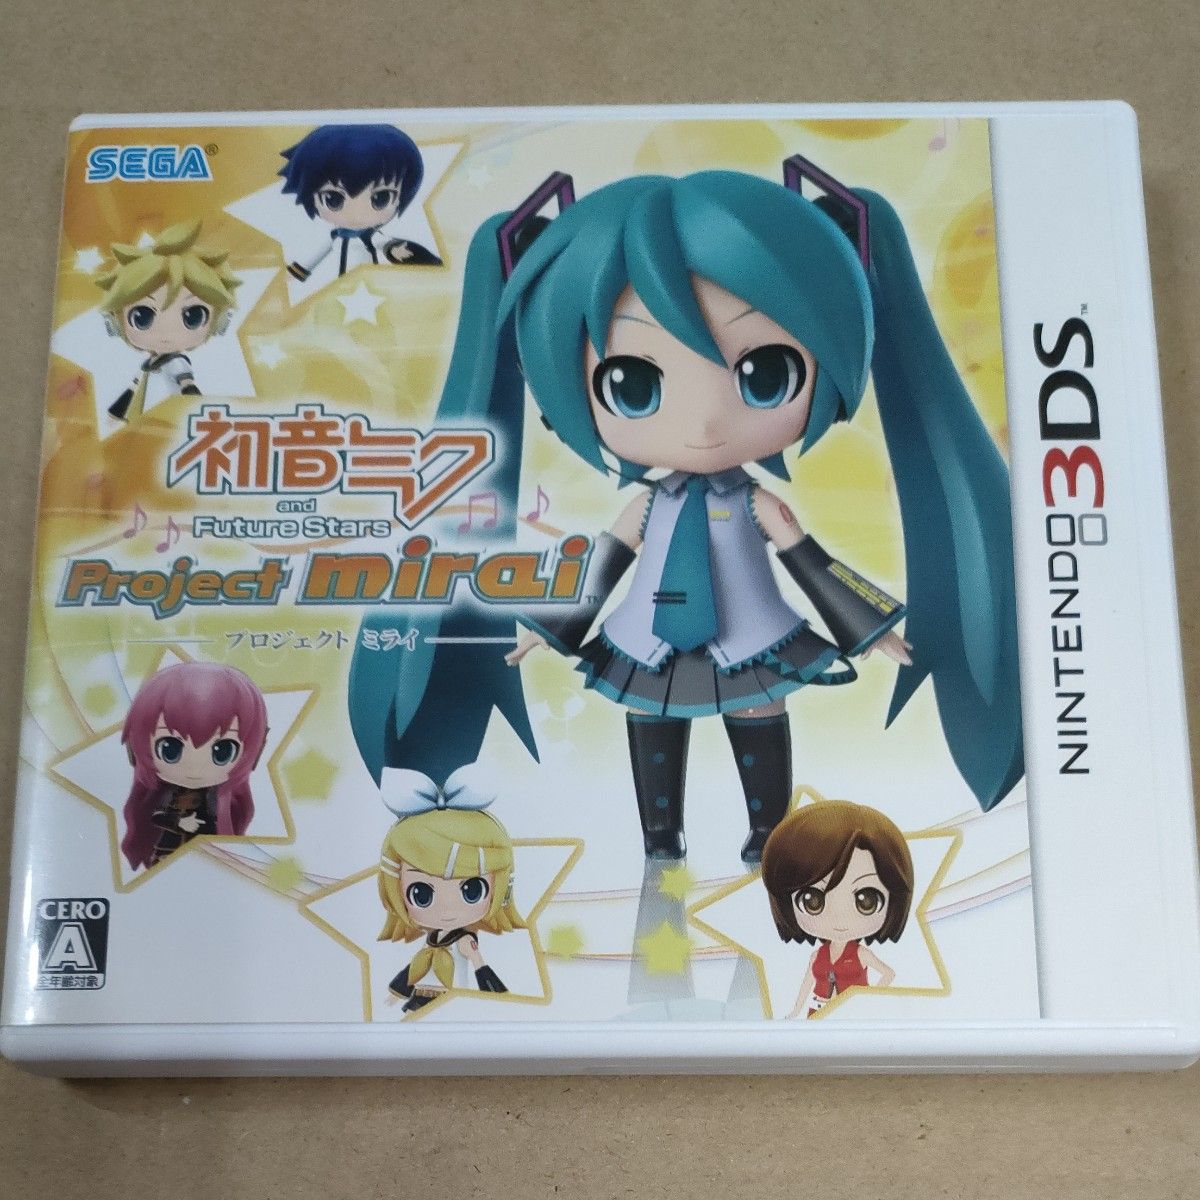 【3DS】 初音ミク and Future Stars Project mirai [通常版］